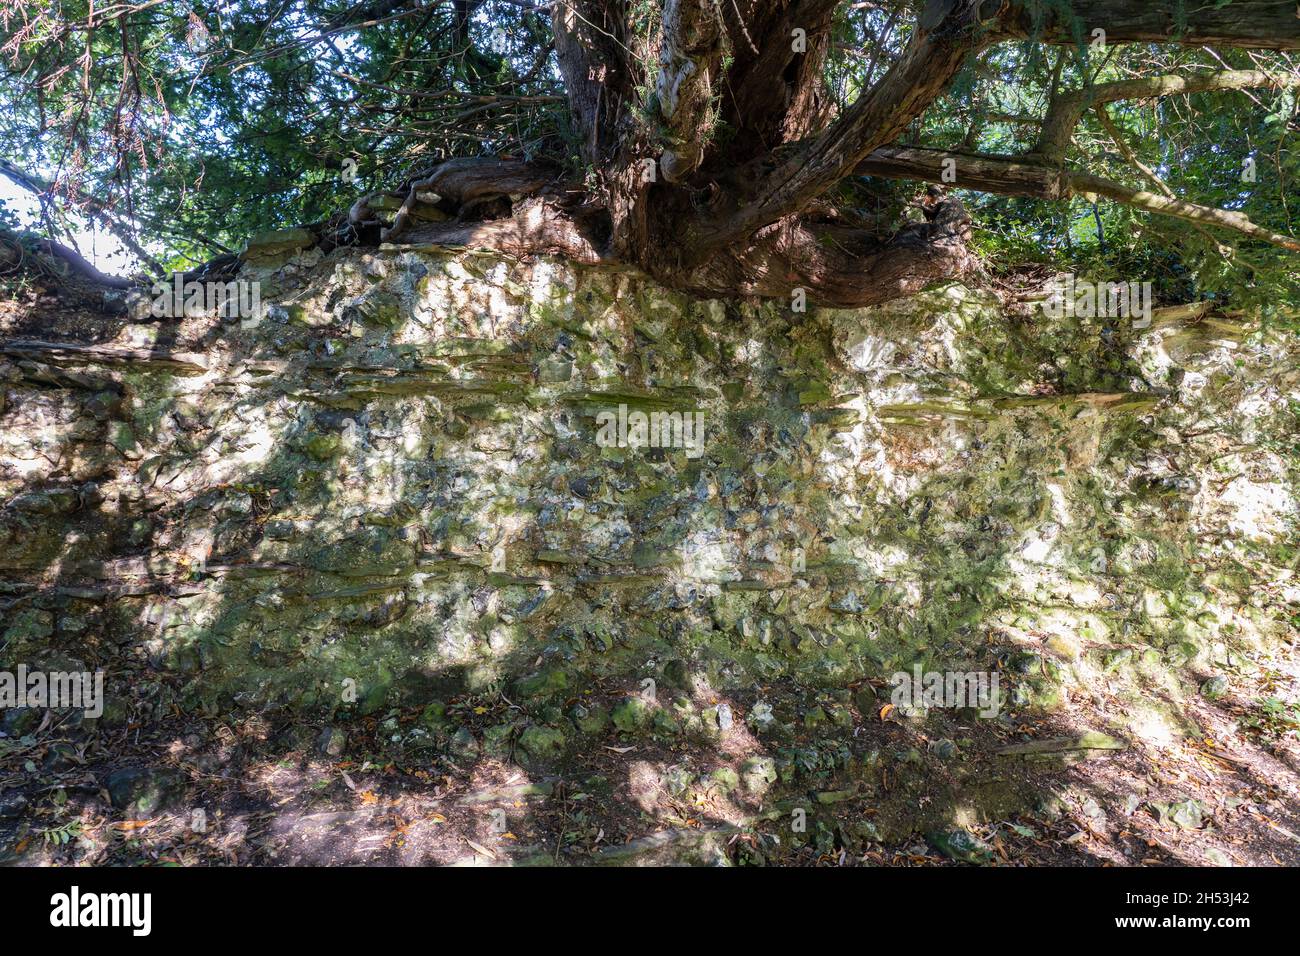 A tree growing atop a section of ruined Roman town wall showing the flint and stone core held together by lime mortar at Silchester. Hampshire, UK Stock Photo